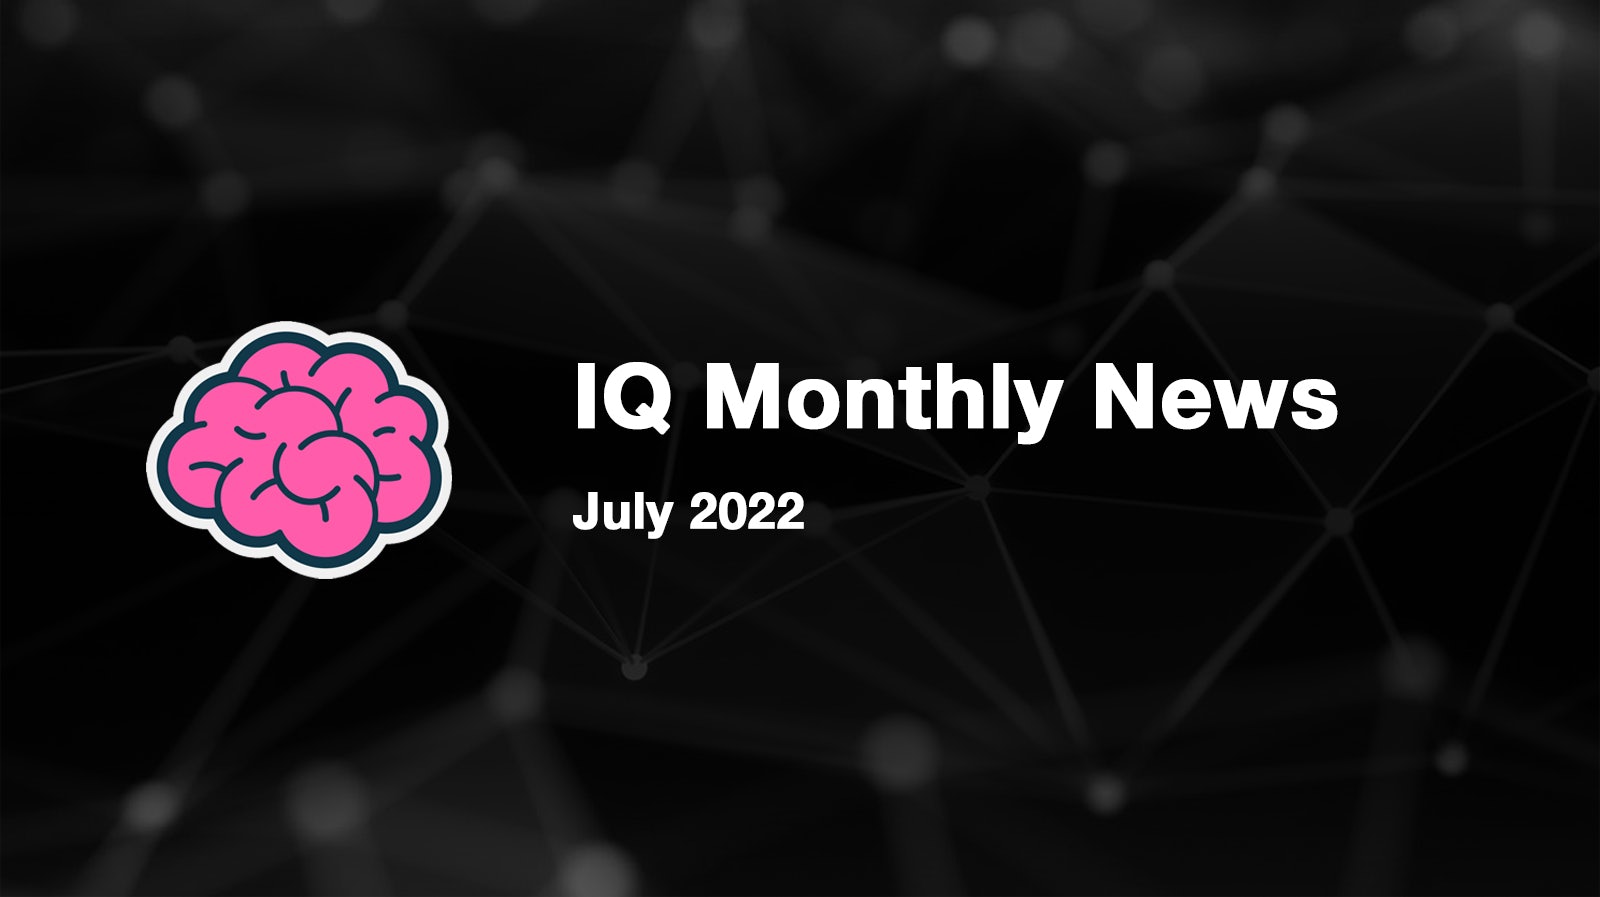 IQ Monthly News - July 2022